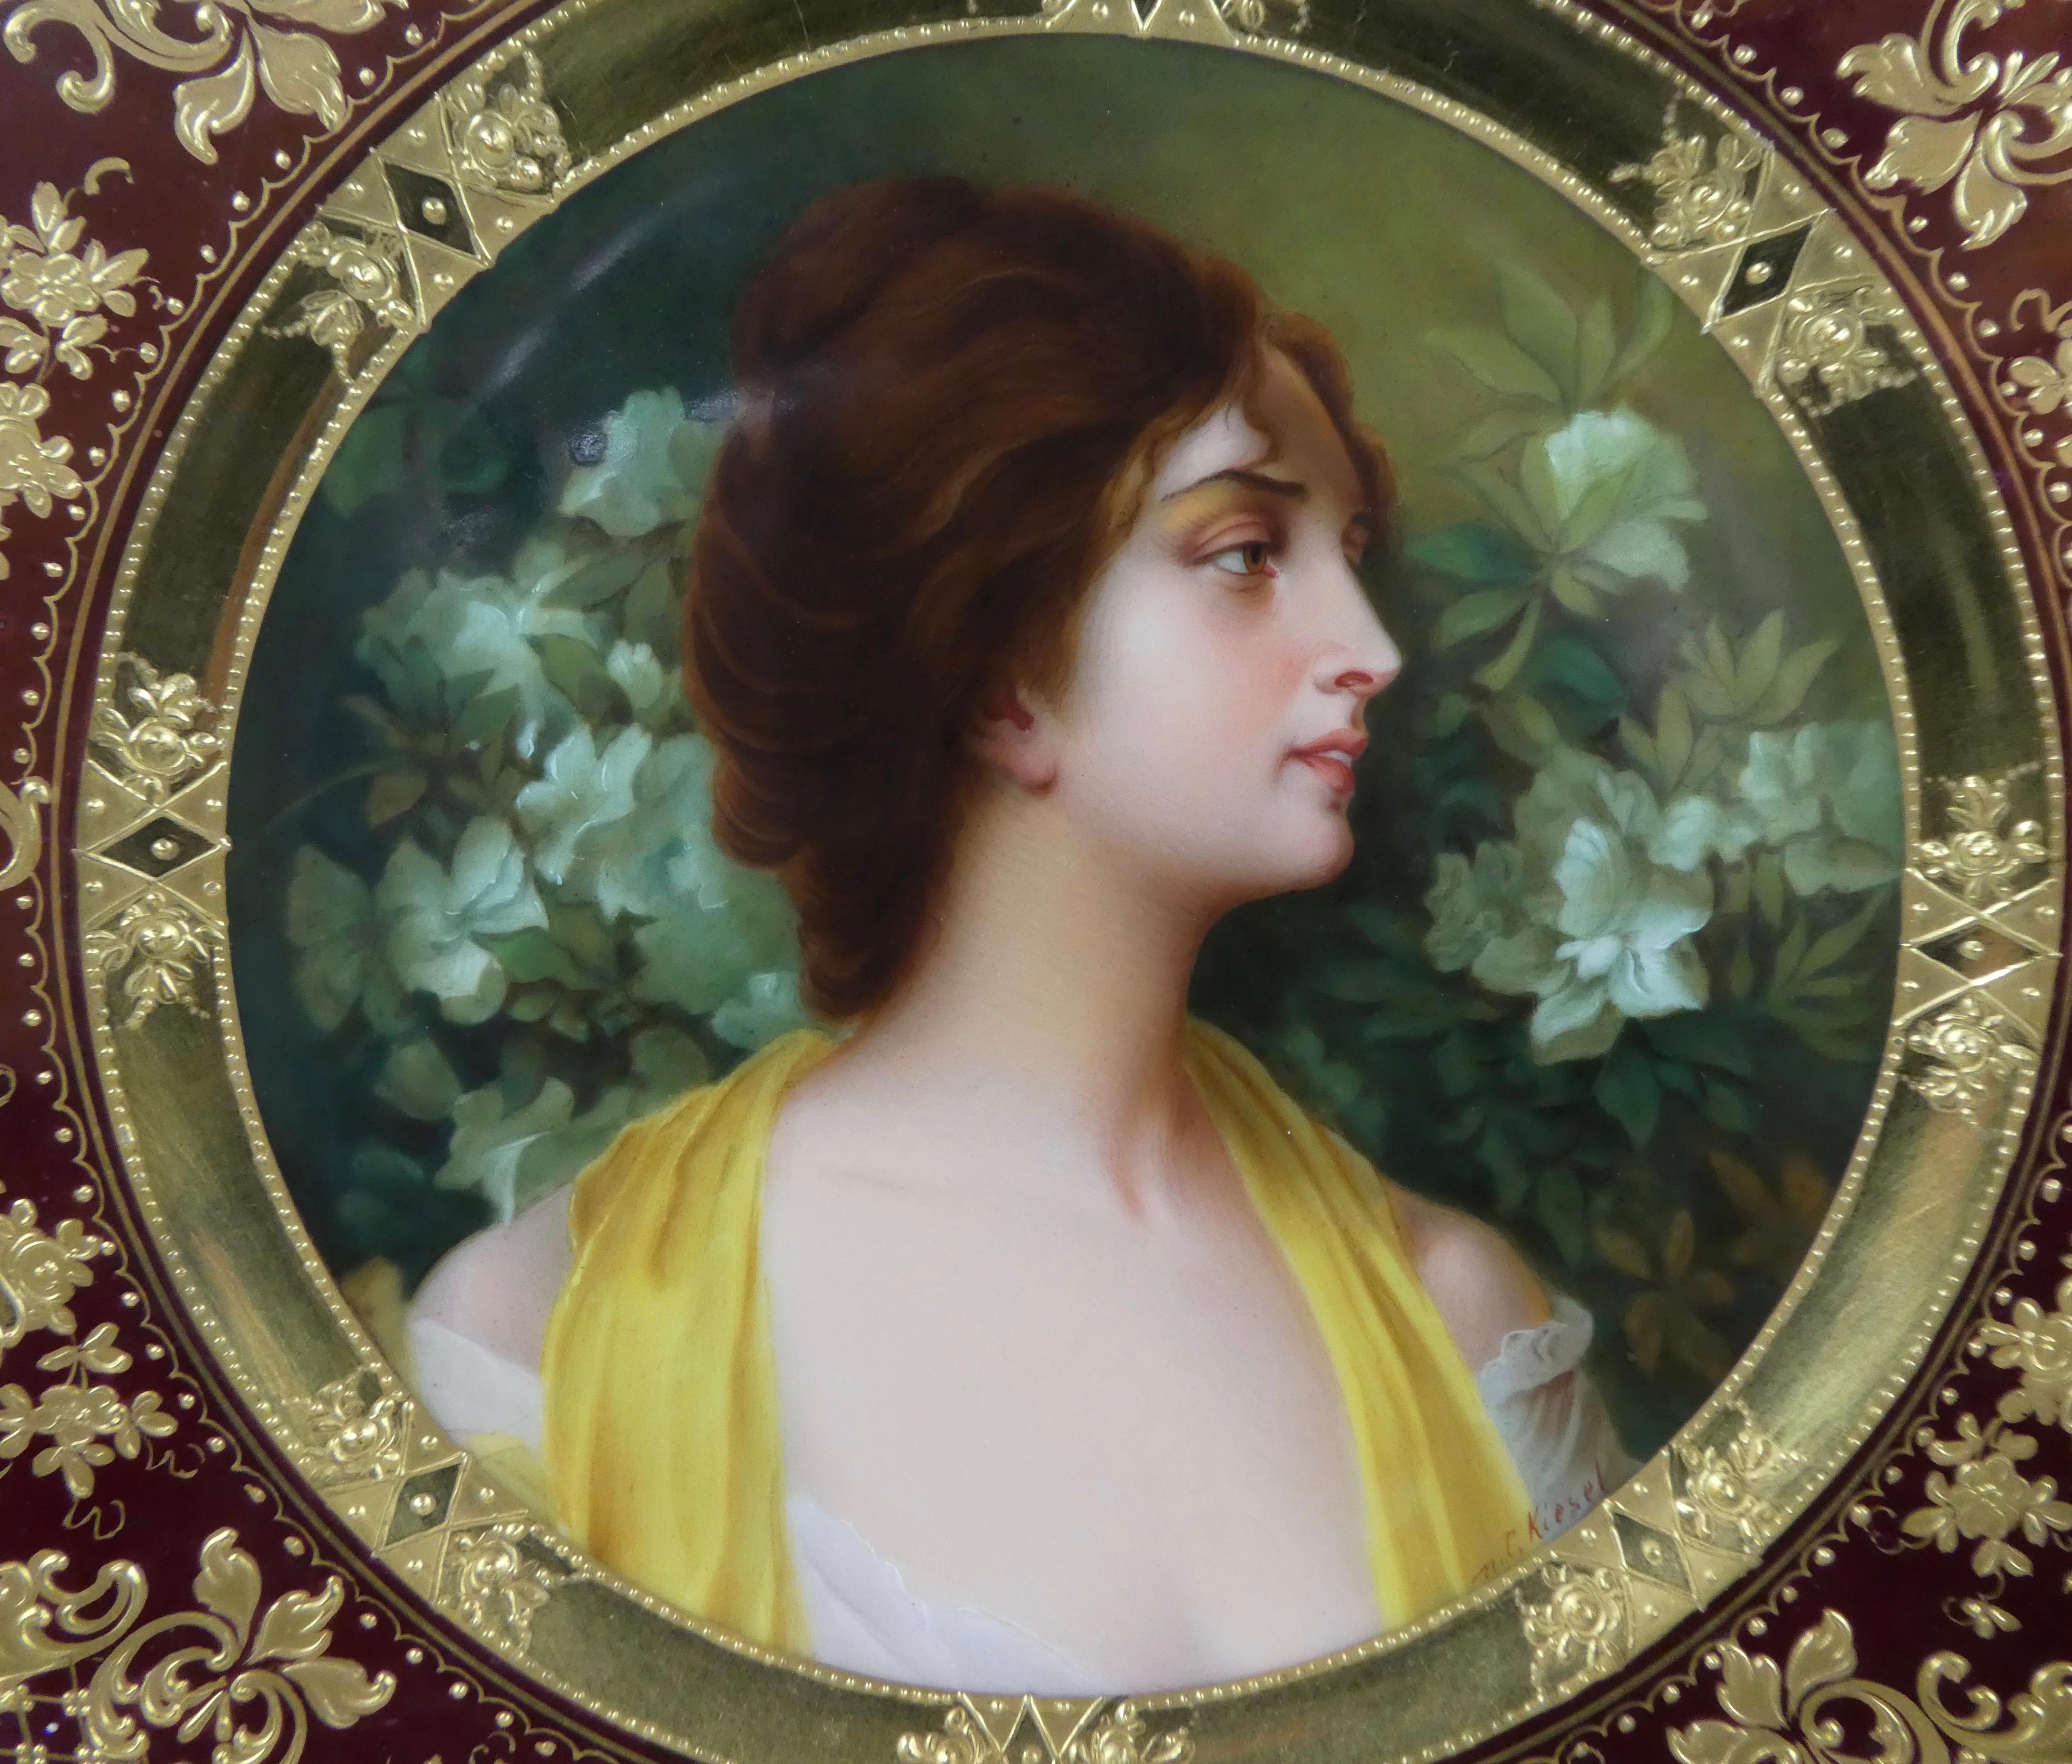 A Dresden Porcelain plate, circa 1900. Finely painted in the Vienna style, with a titled portrait of ‘Azalee’, by C. Kiesel. Within a burgundy ground border, finely gilded with cornucopia, amongst elaborate scrollwork.
Signed - C. Kiesel.
Printed